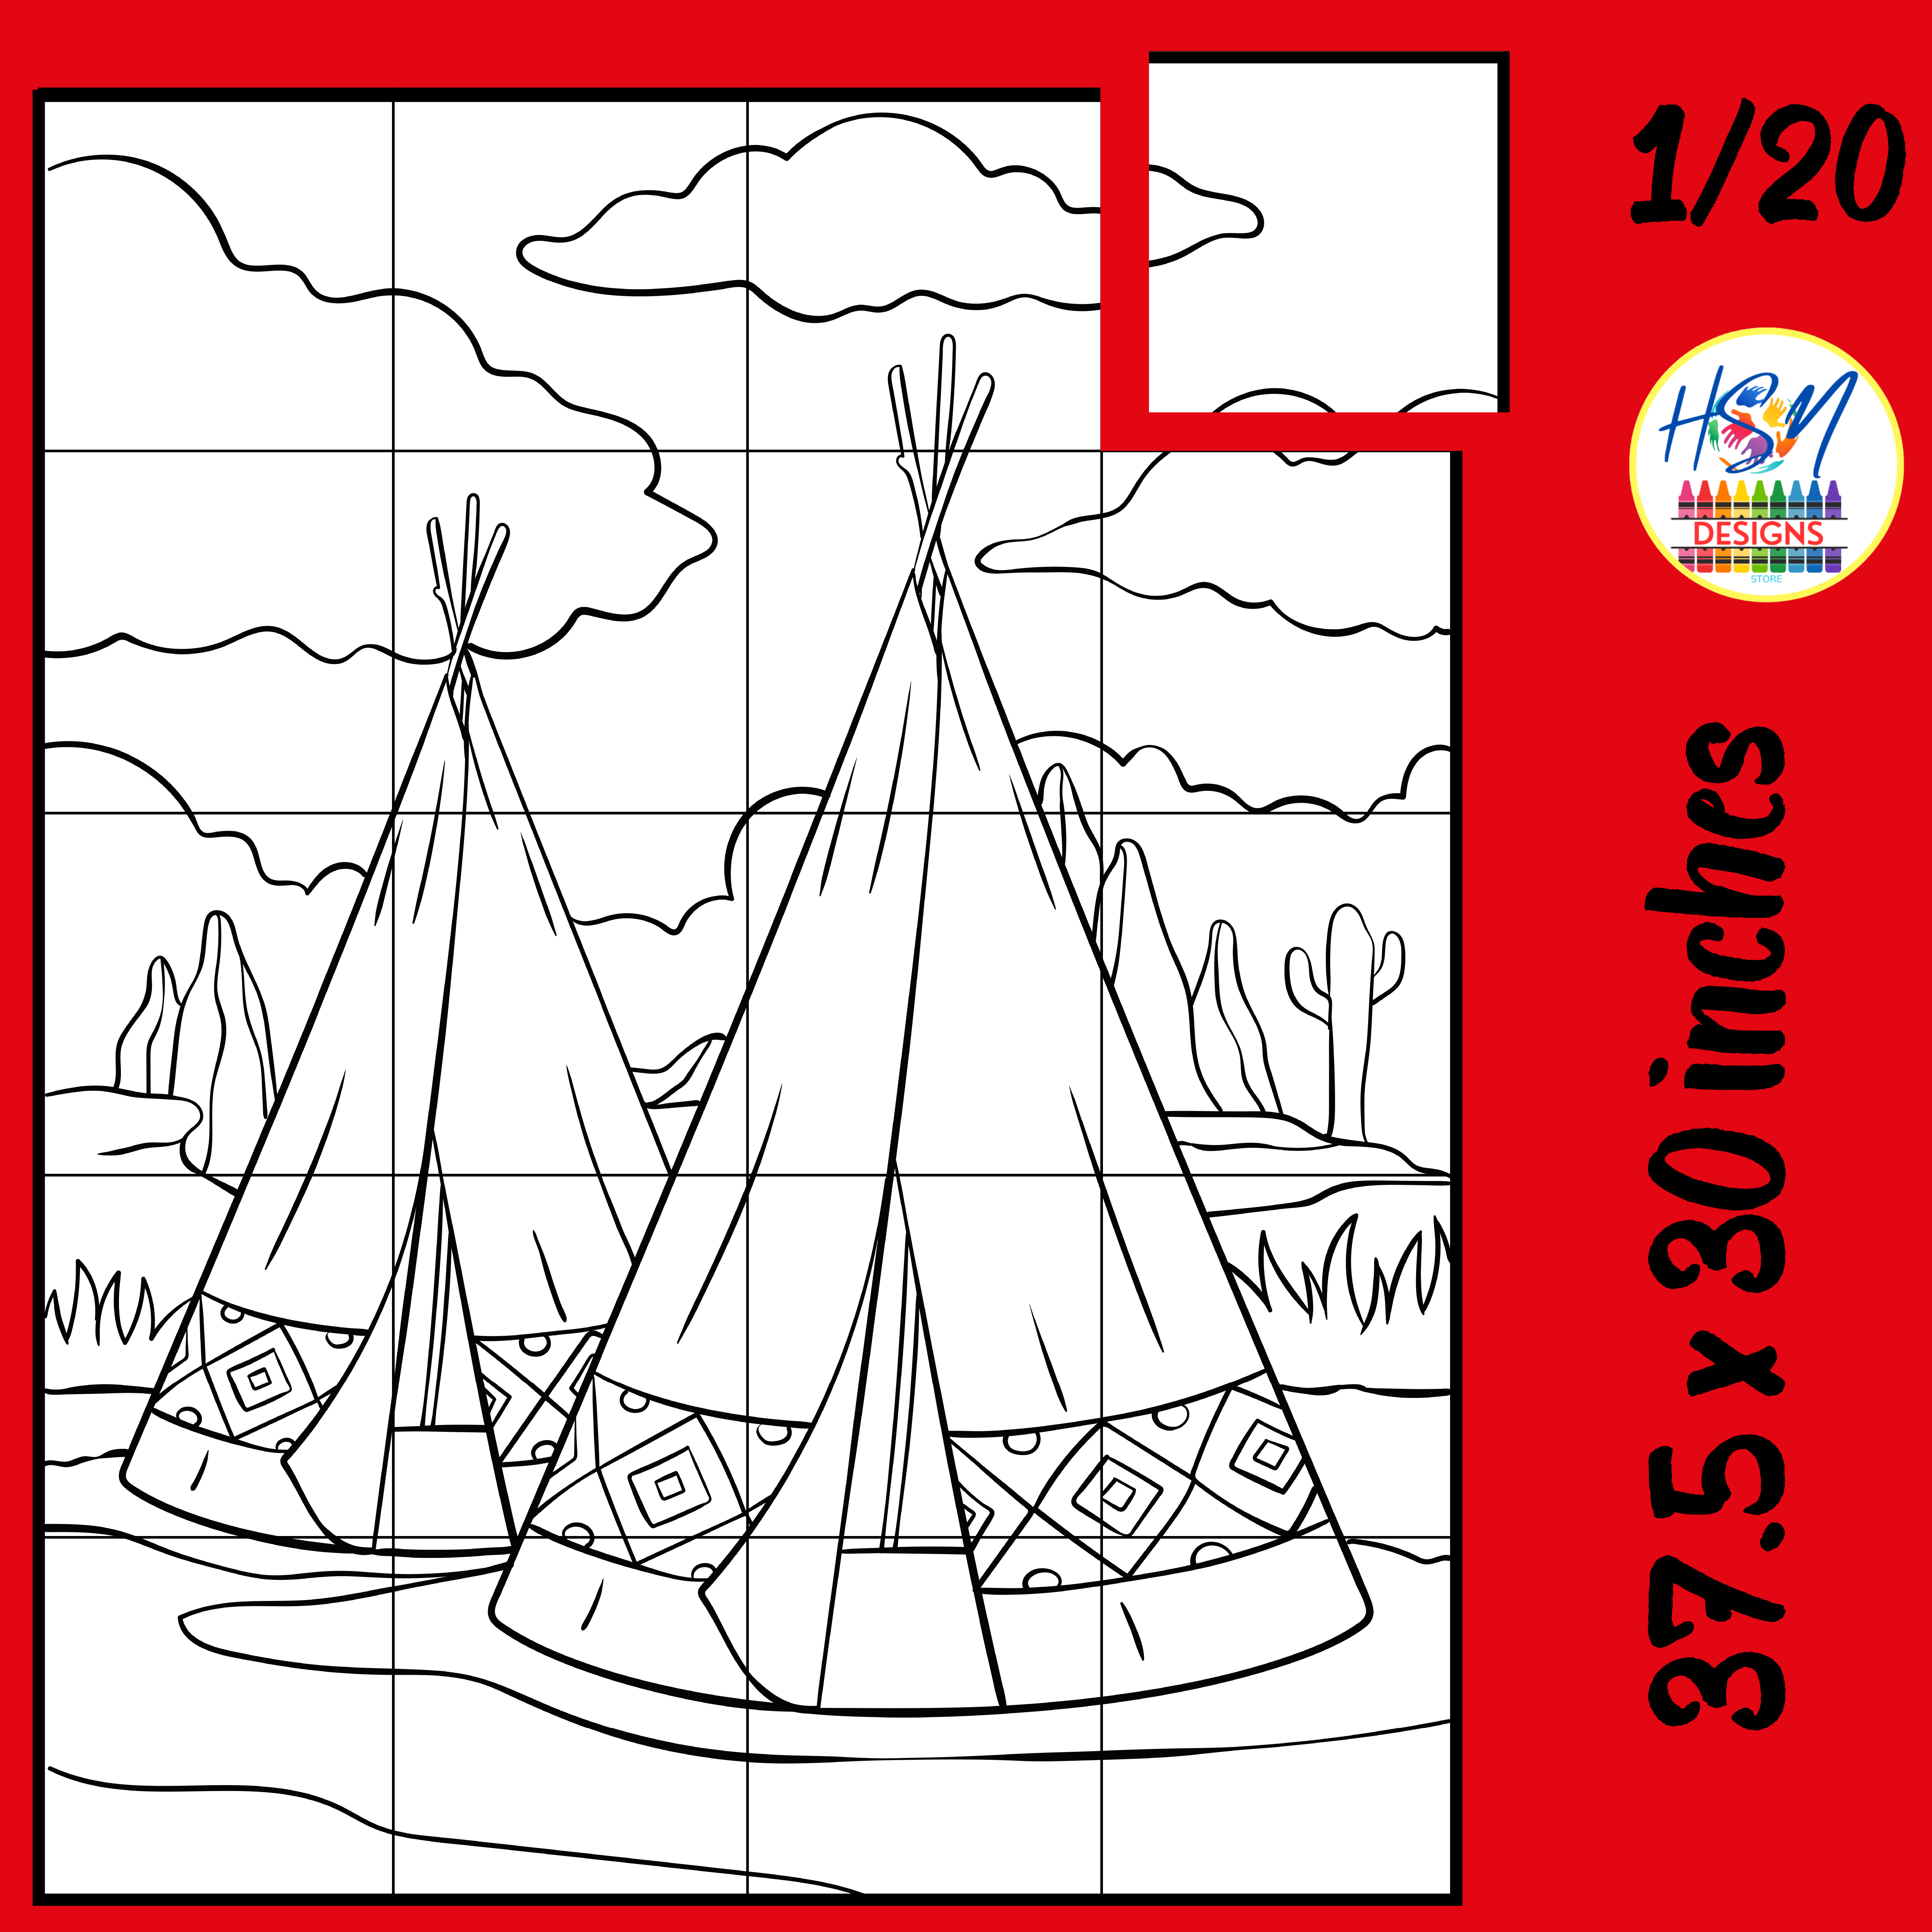 Native american heritage month tepees collaborative poster art coloring pages made by teachers